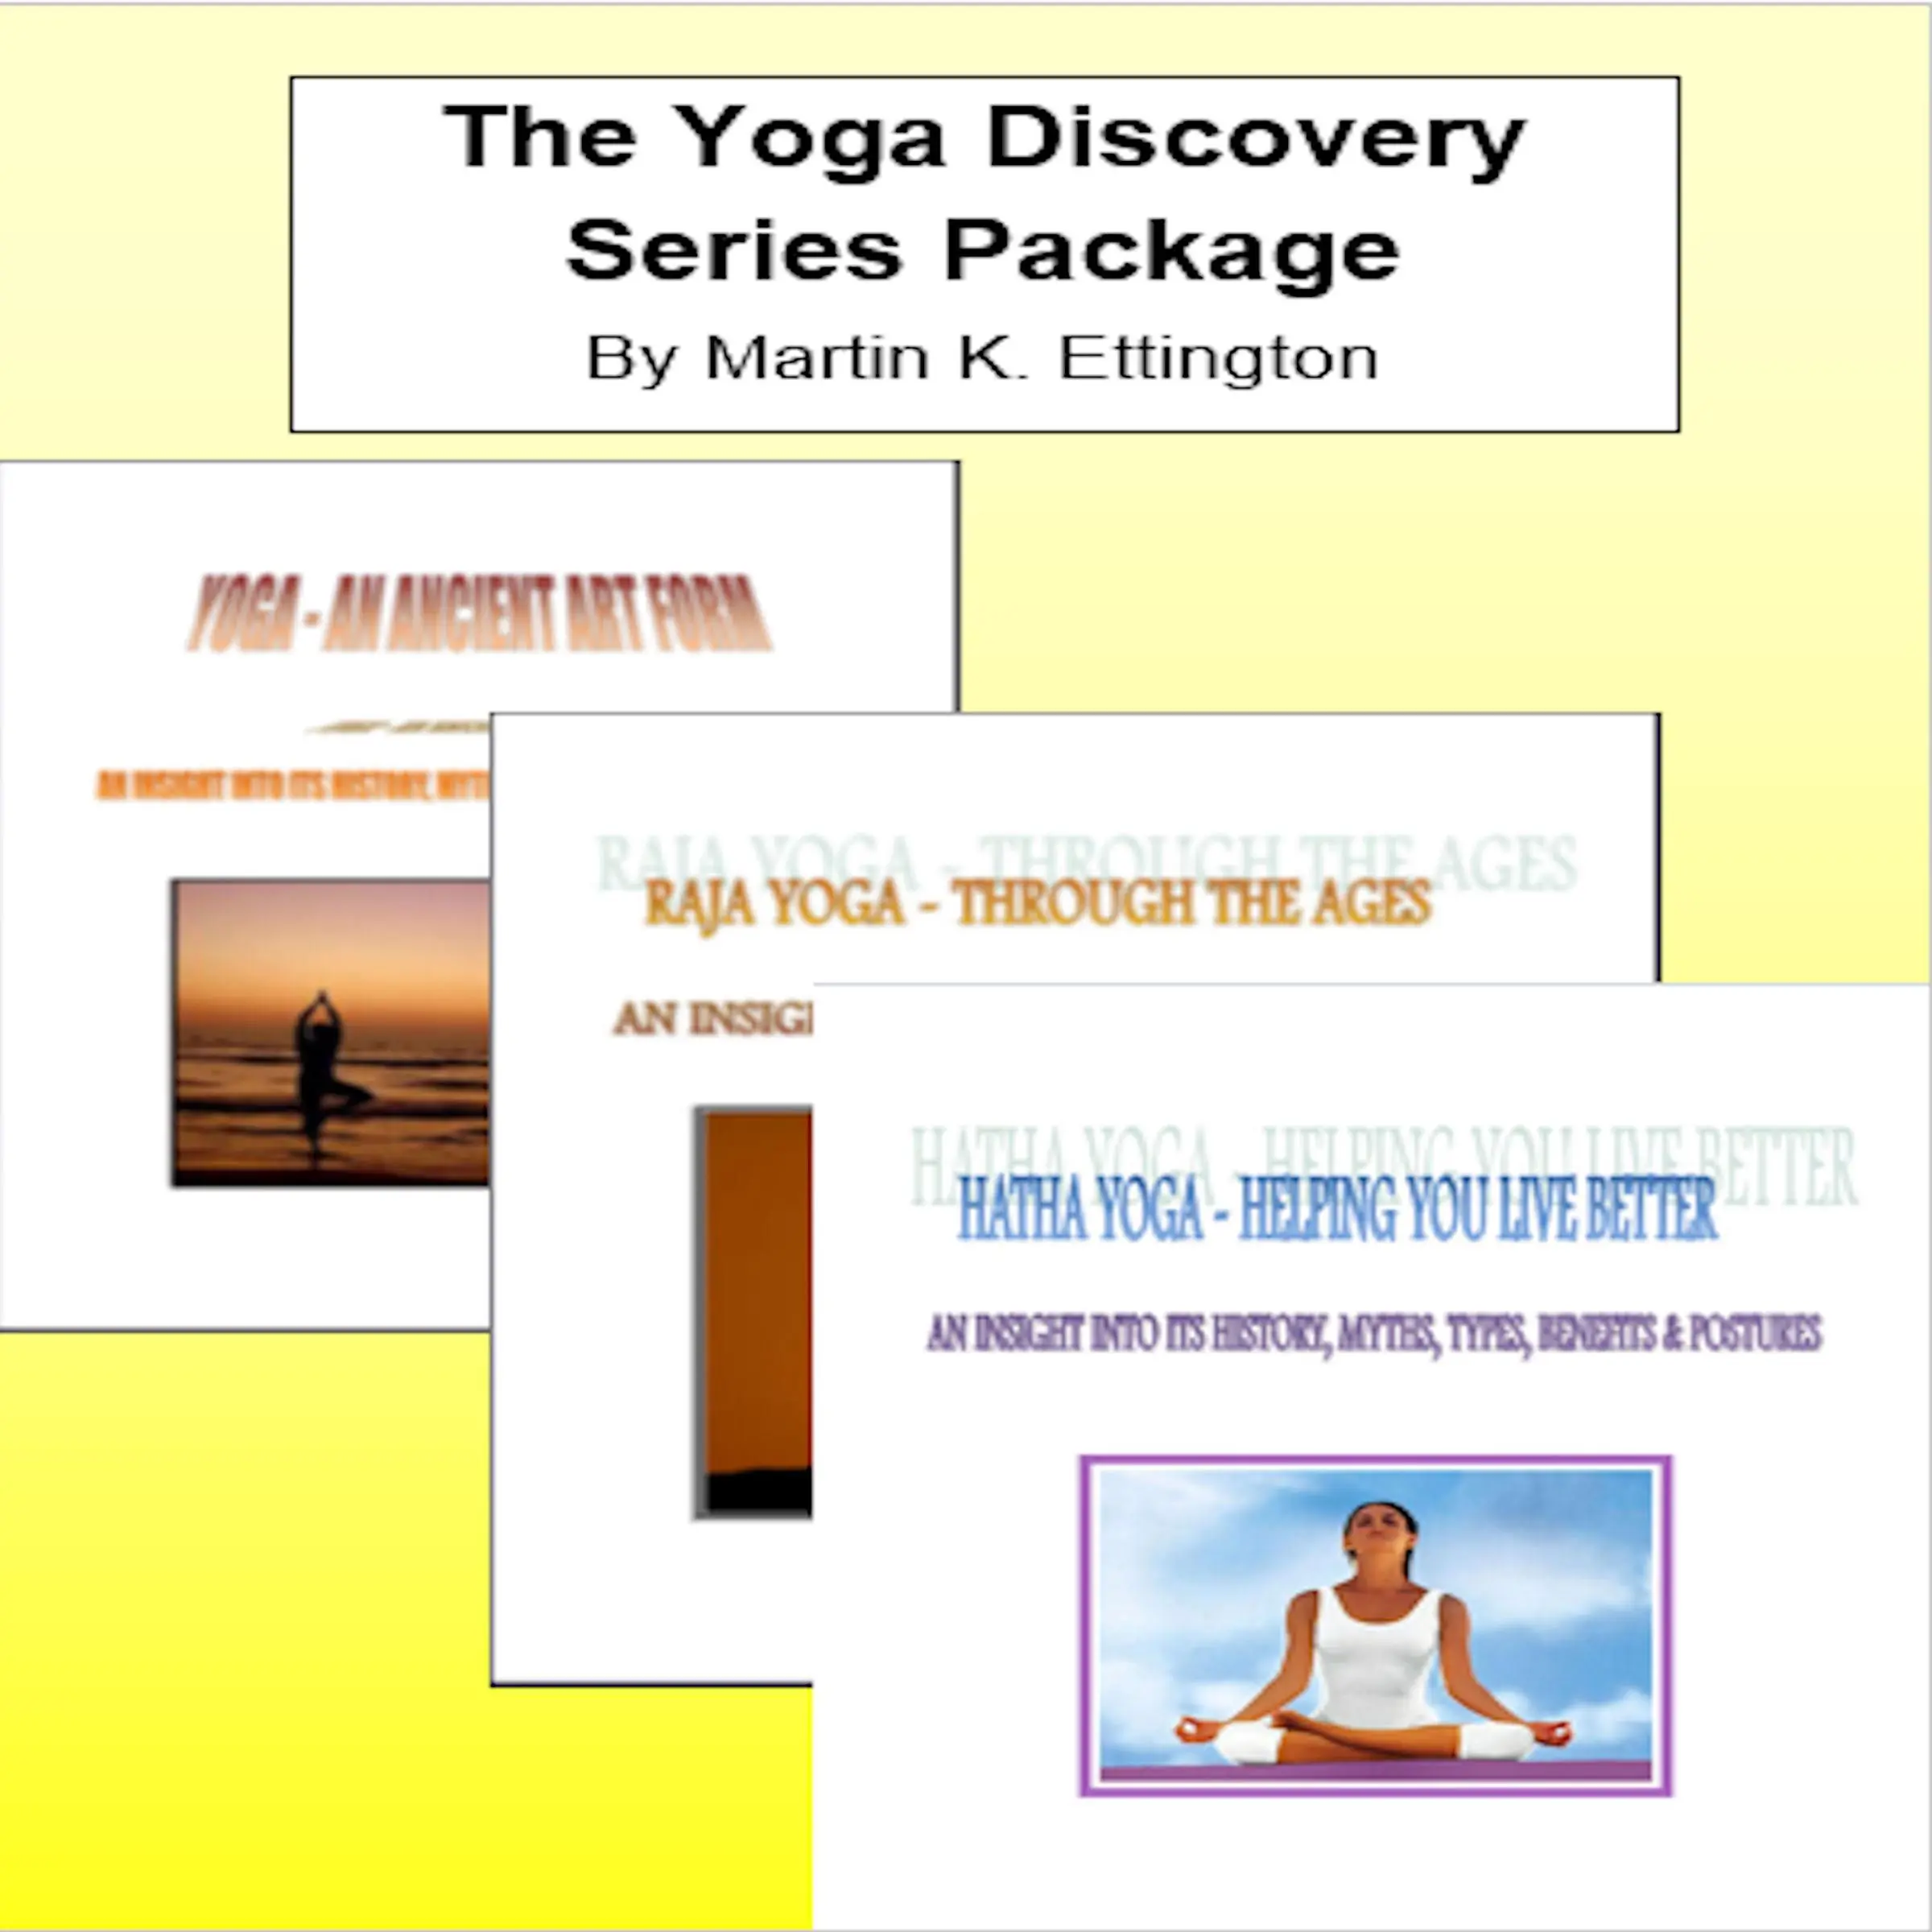 The Yoga Discovery Series Package Audiobook by Martin K. Ettington